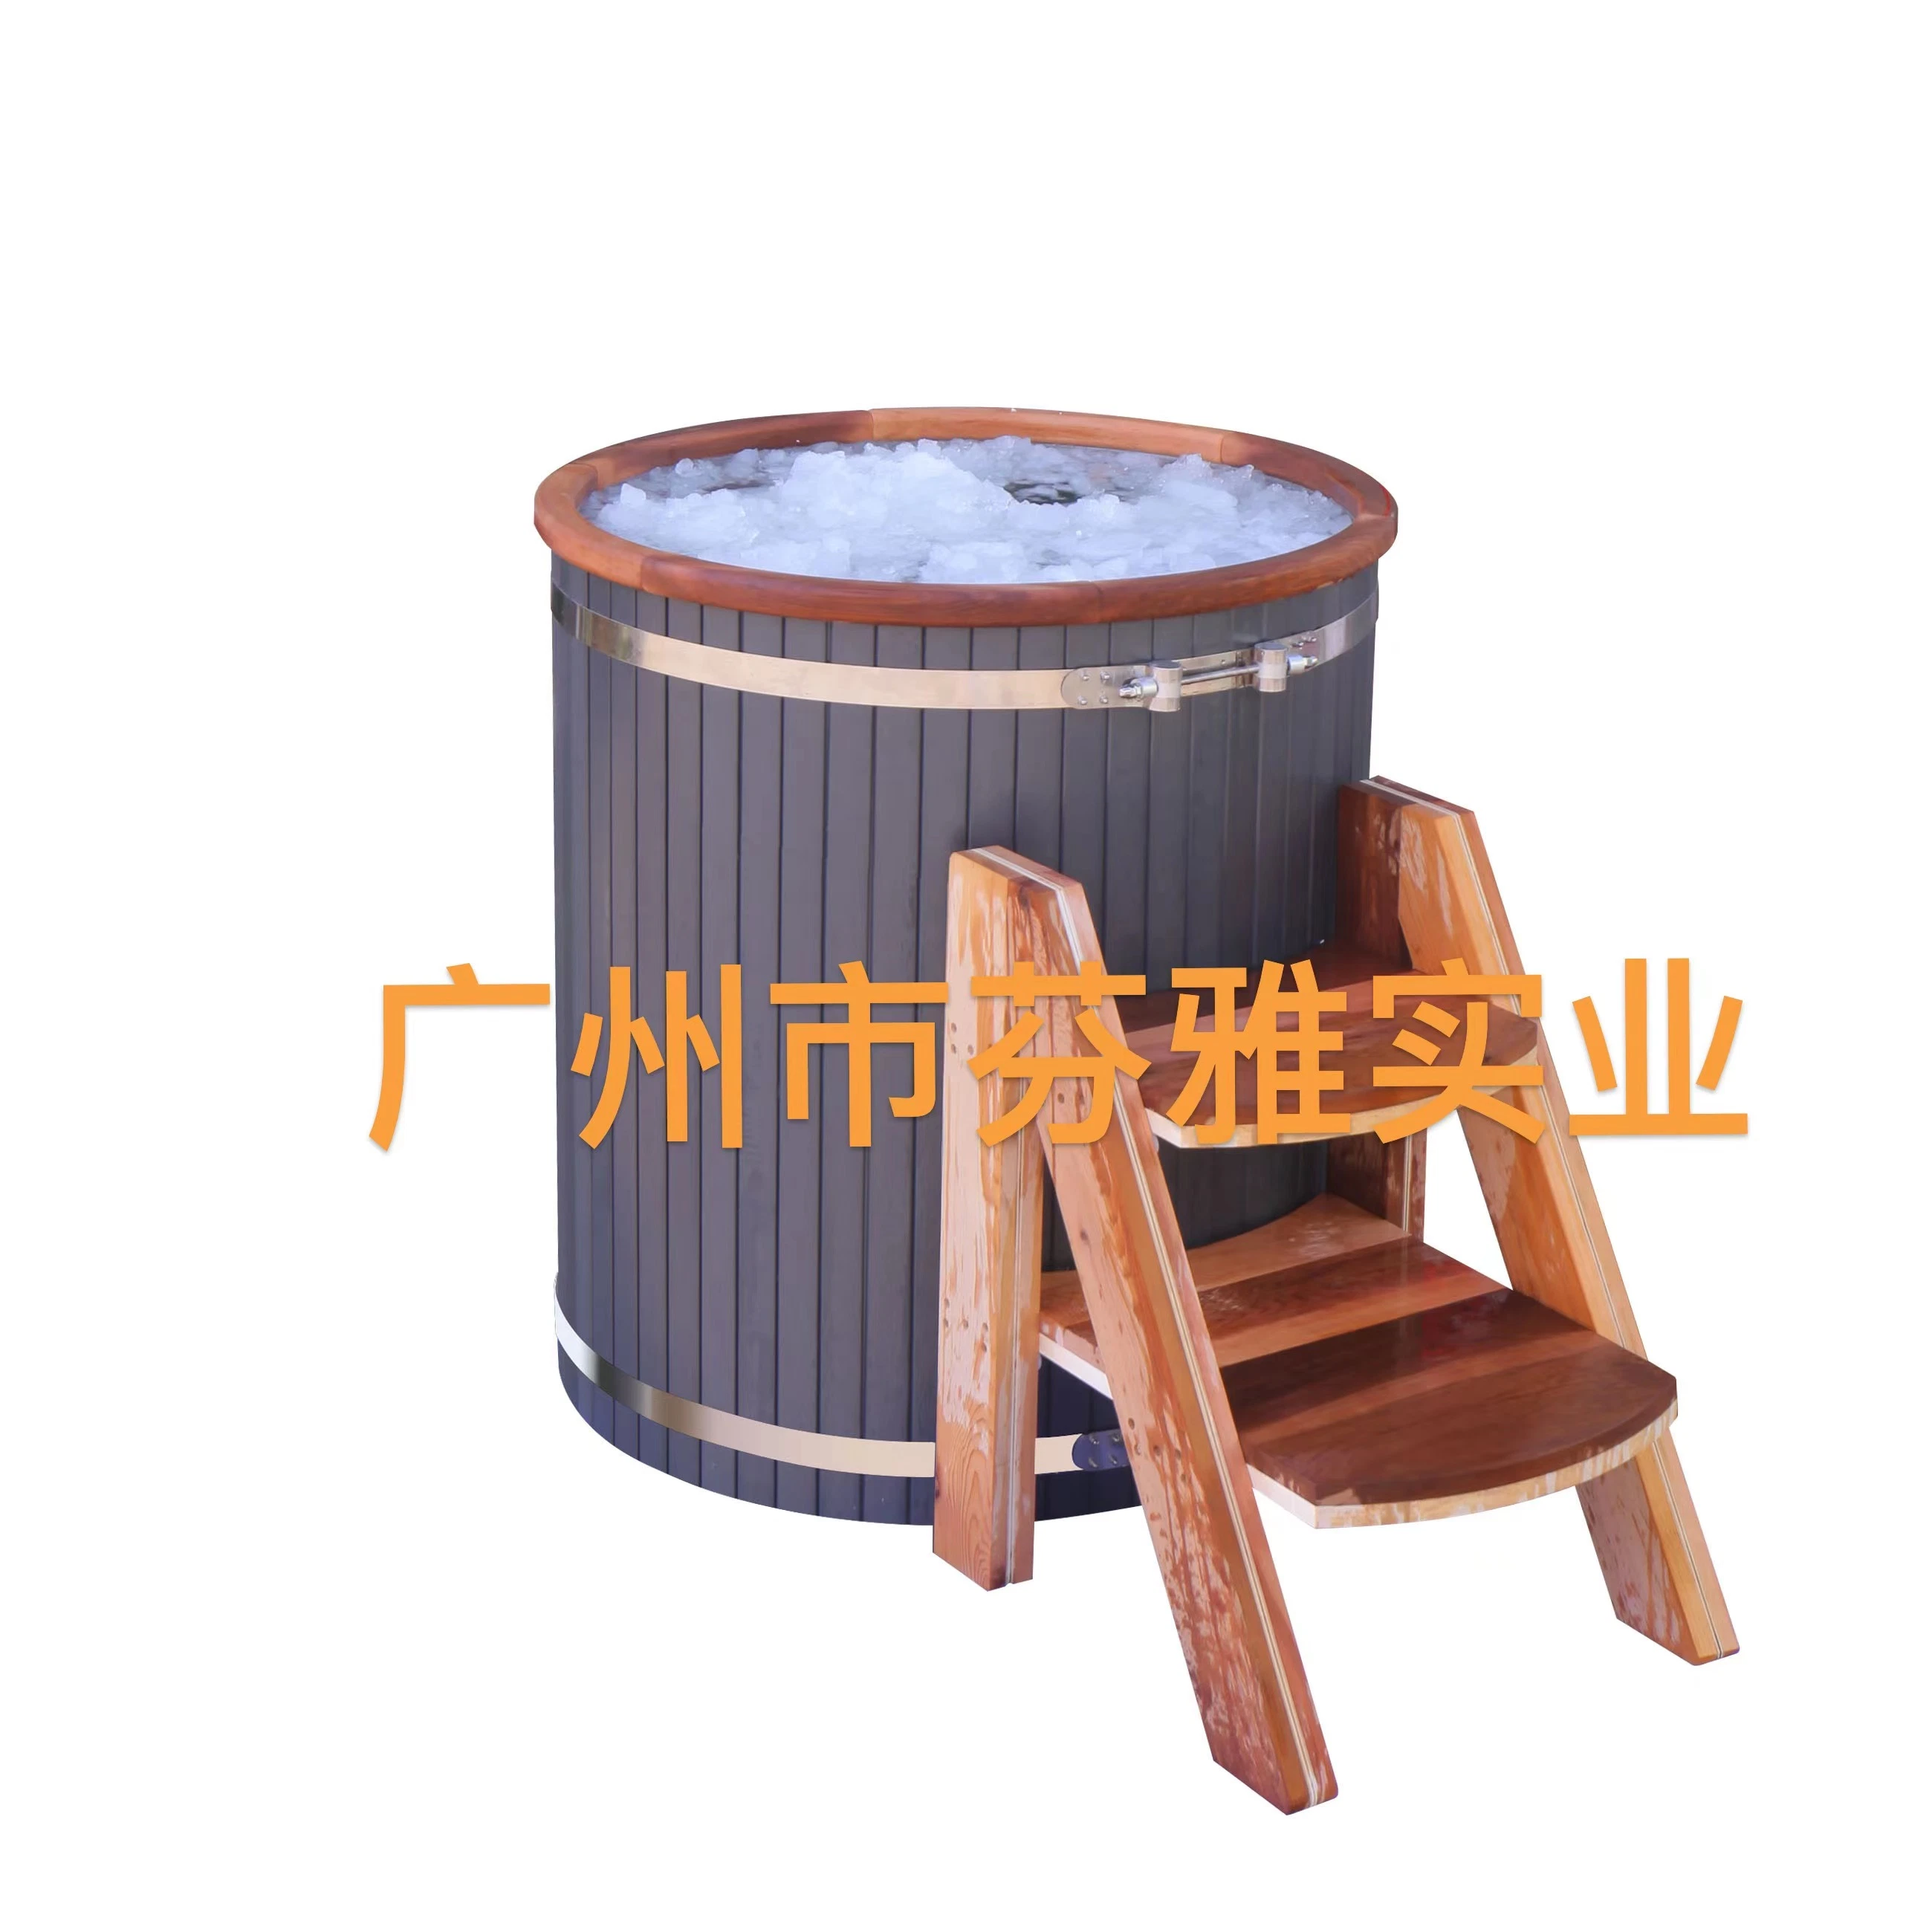 Outdoor Barrel Wooden Cold Plunge Tub Ice Bath for Ice SPA Therapy-1 Person